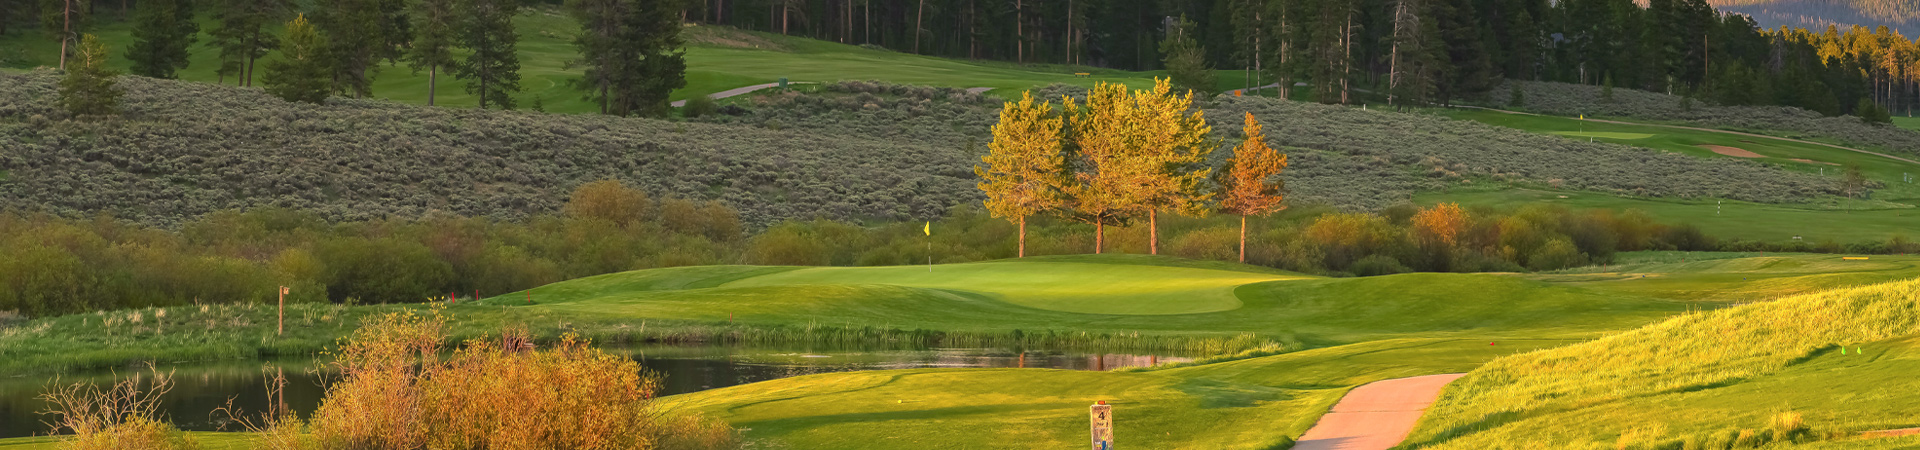 Panoramic view of a serene golf course at dusk, showcasing lush greens in the foreground with a flagstick and hole visible.